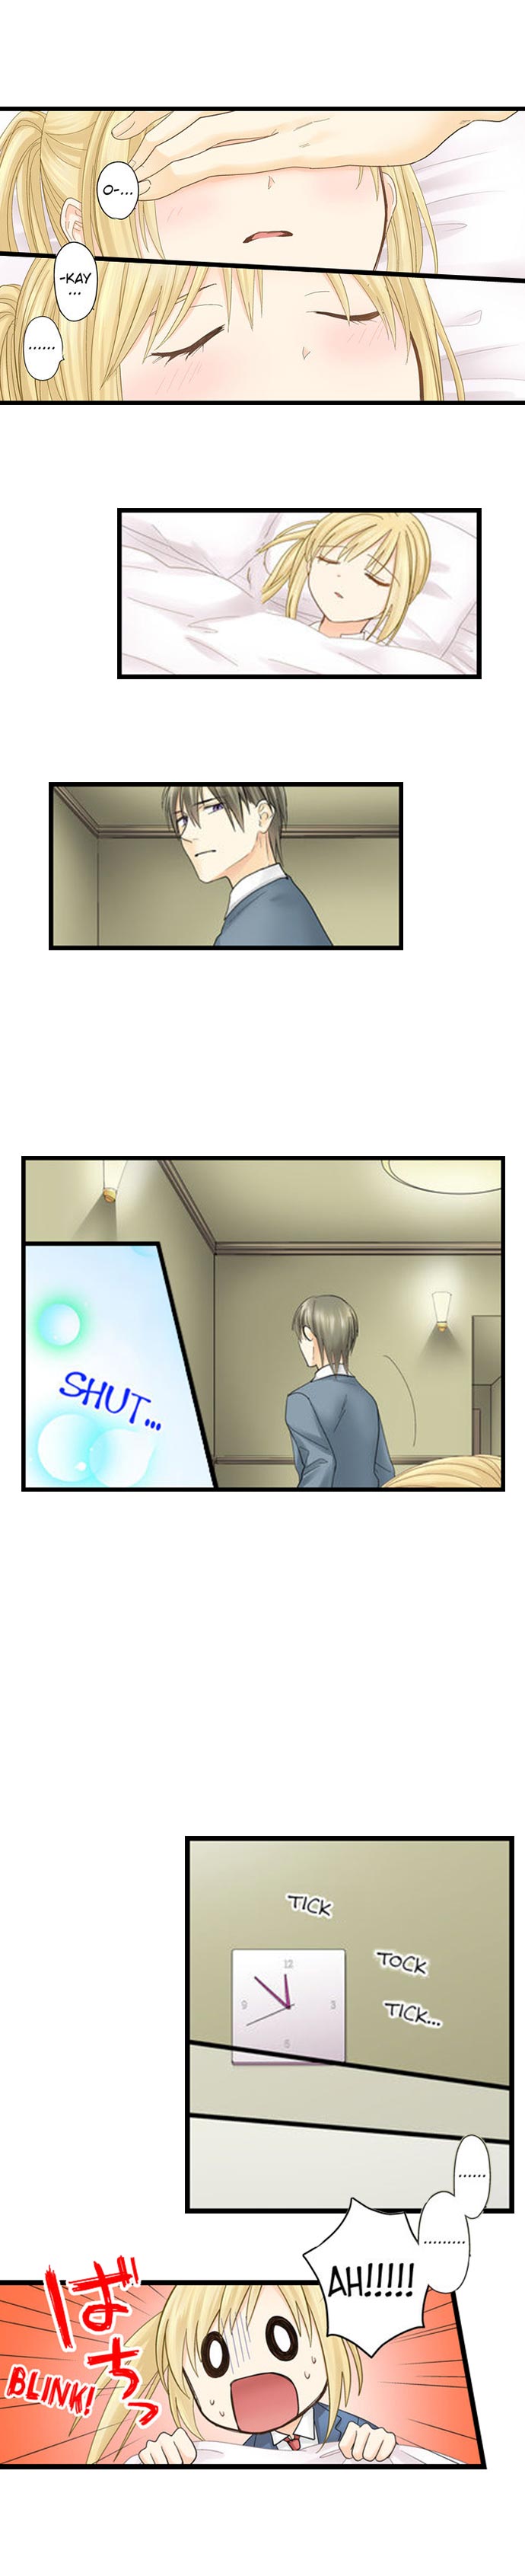 Running a Love Hotel with My Math Teacher - Chapter 9 Page 7